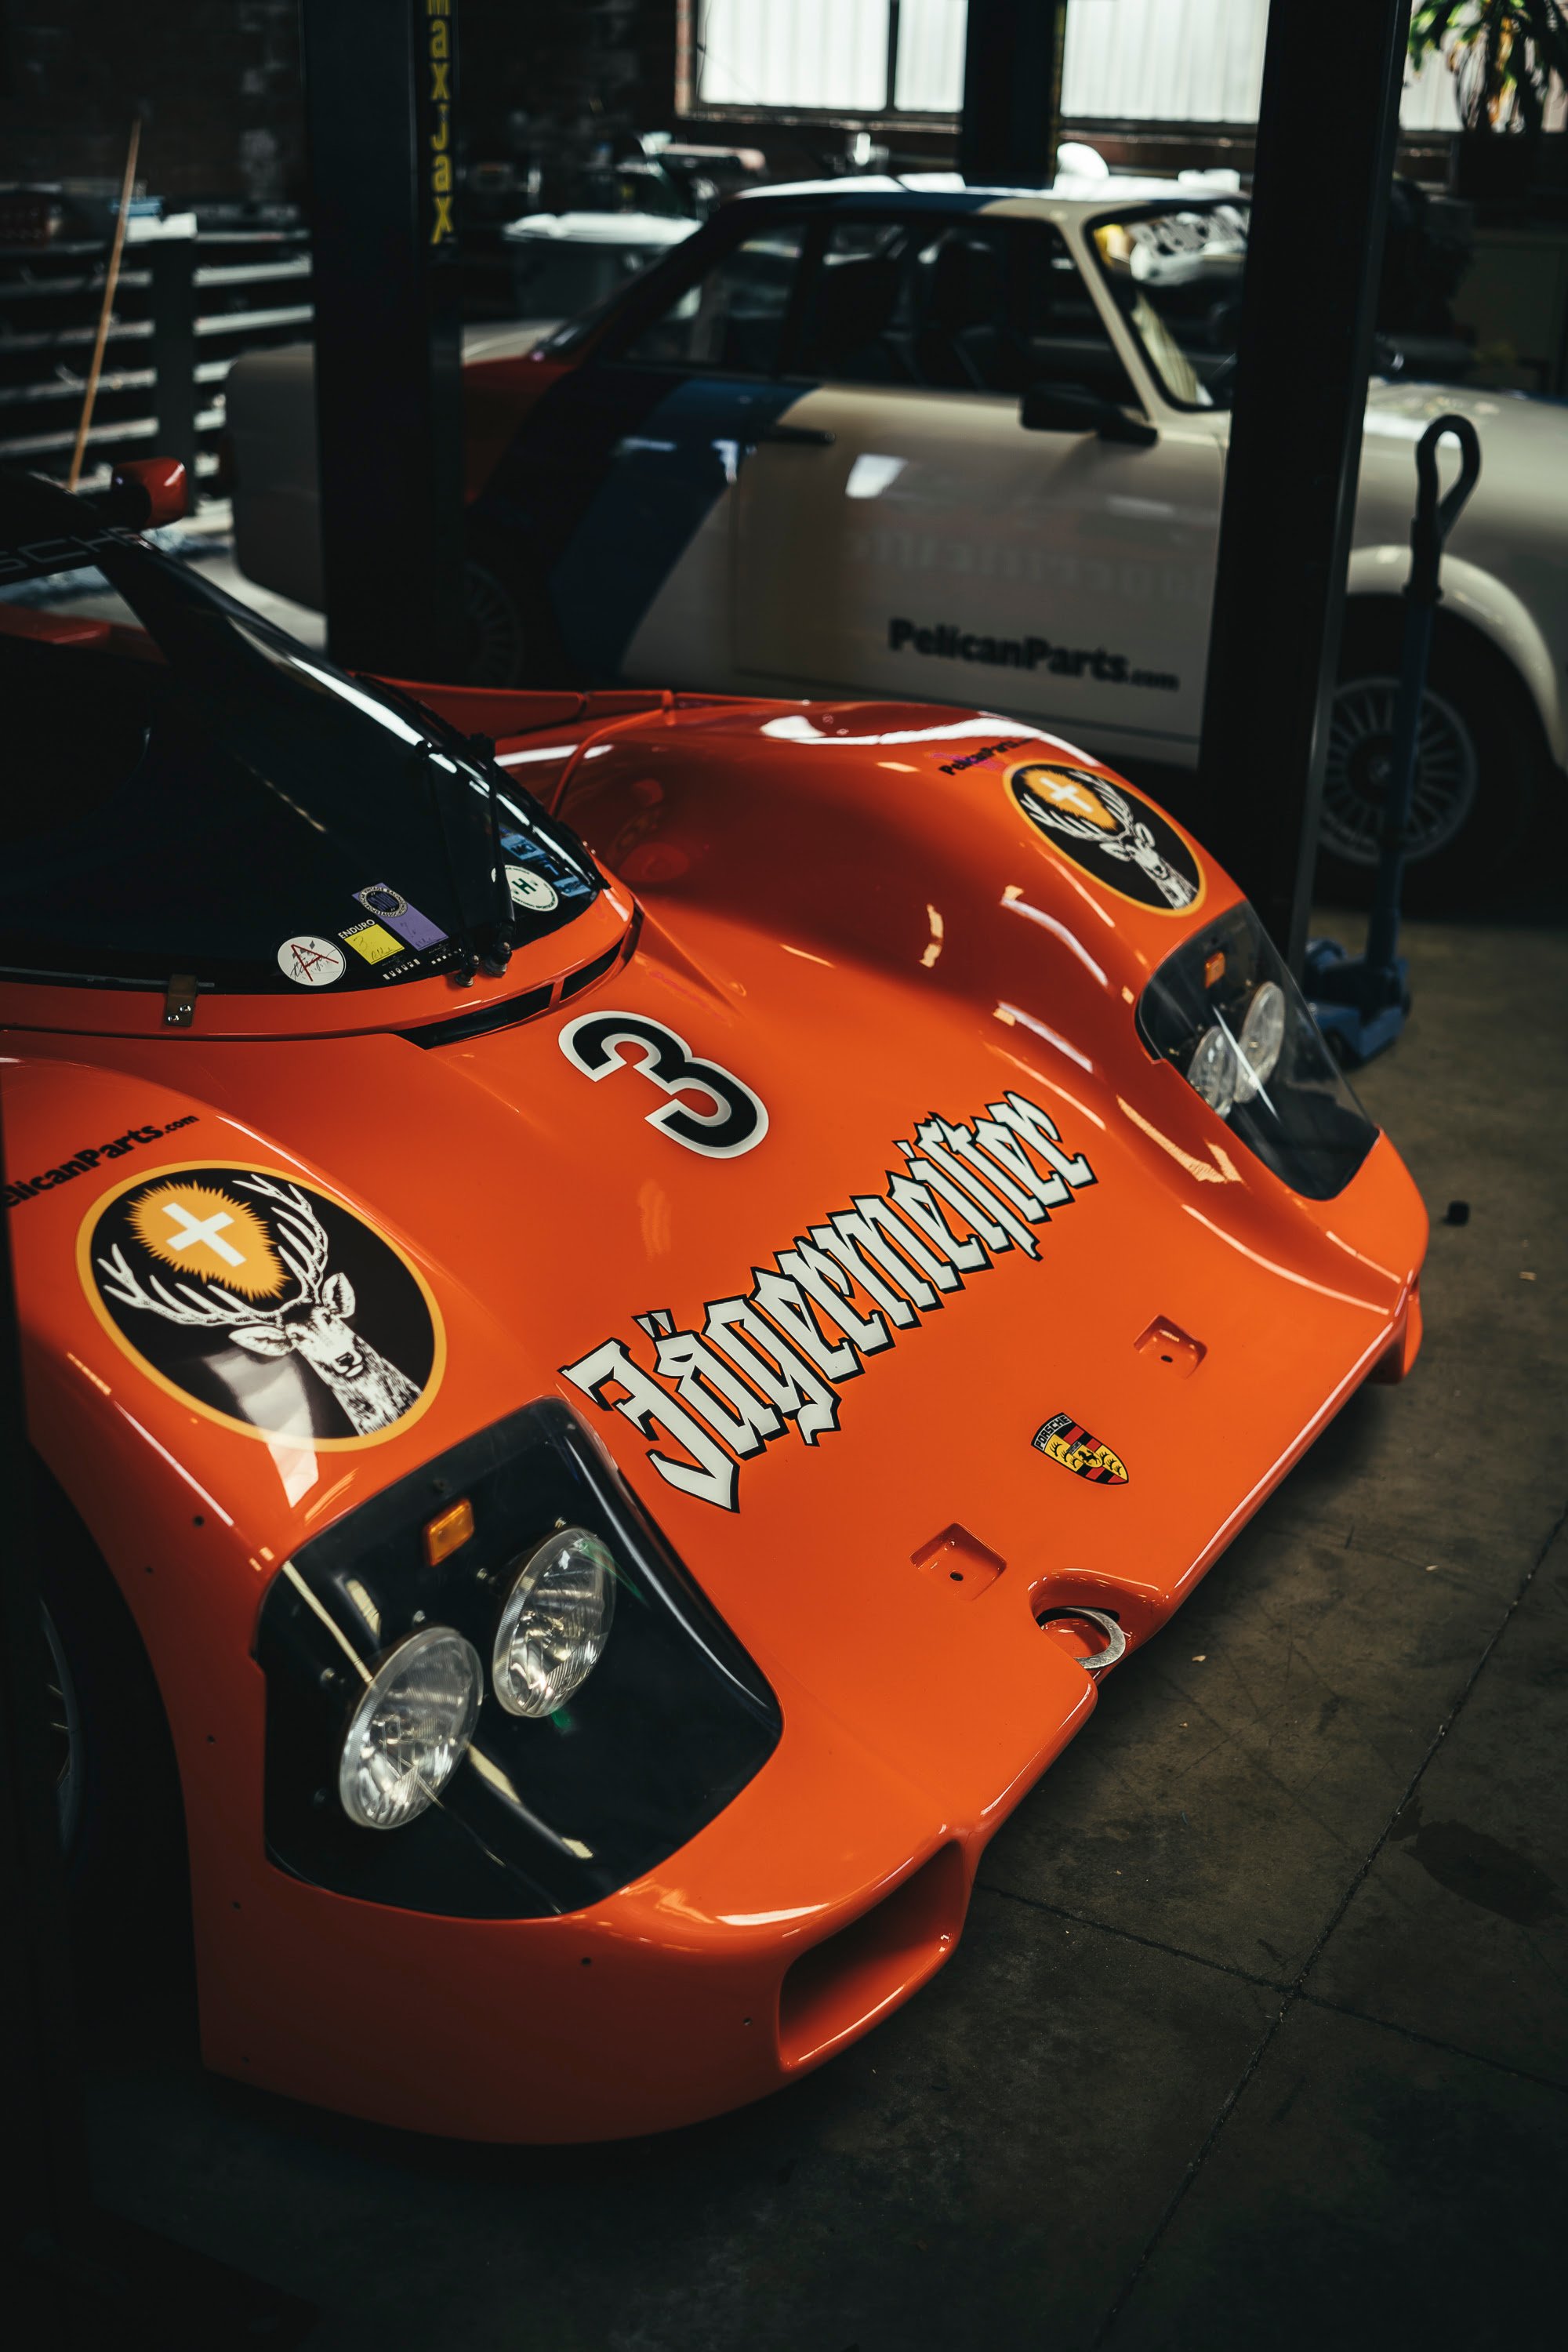 The Jagermeister 962 race car.